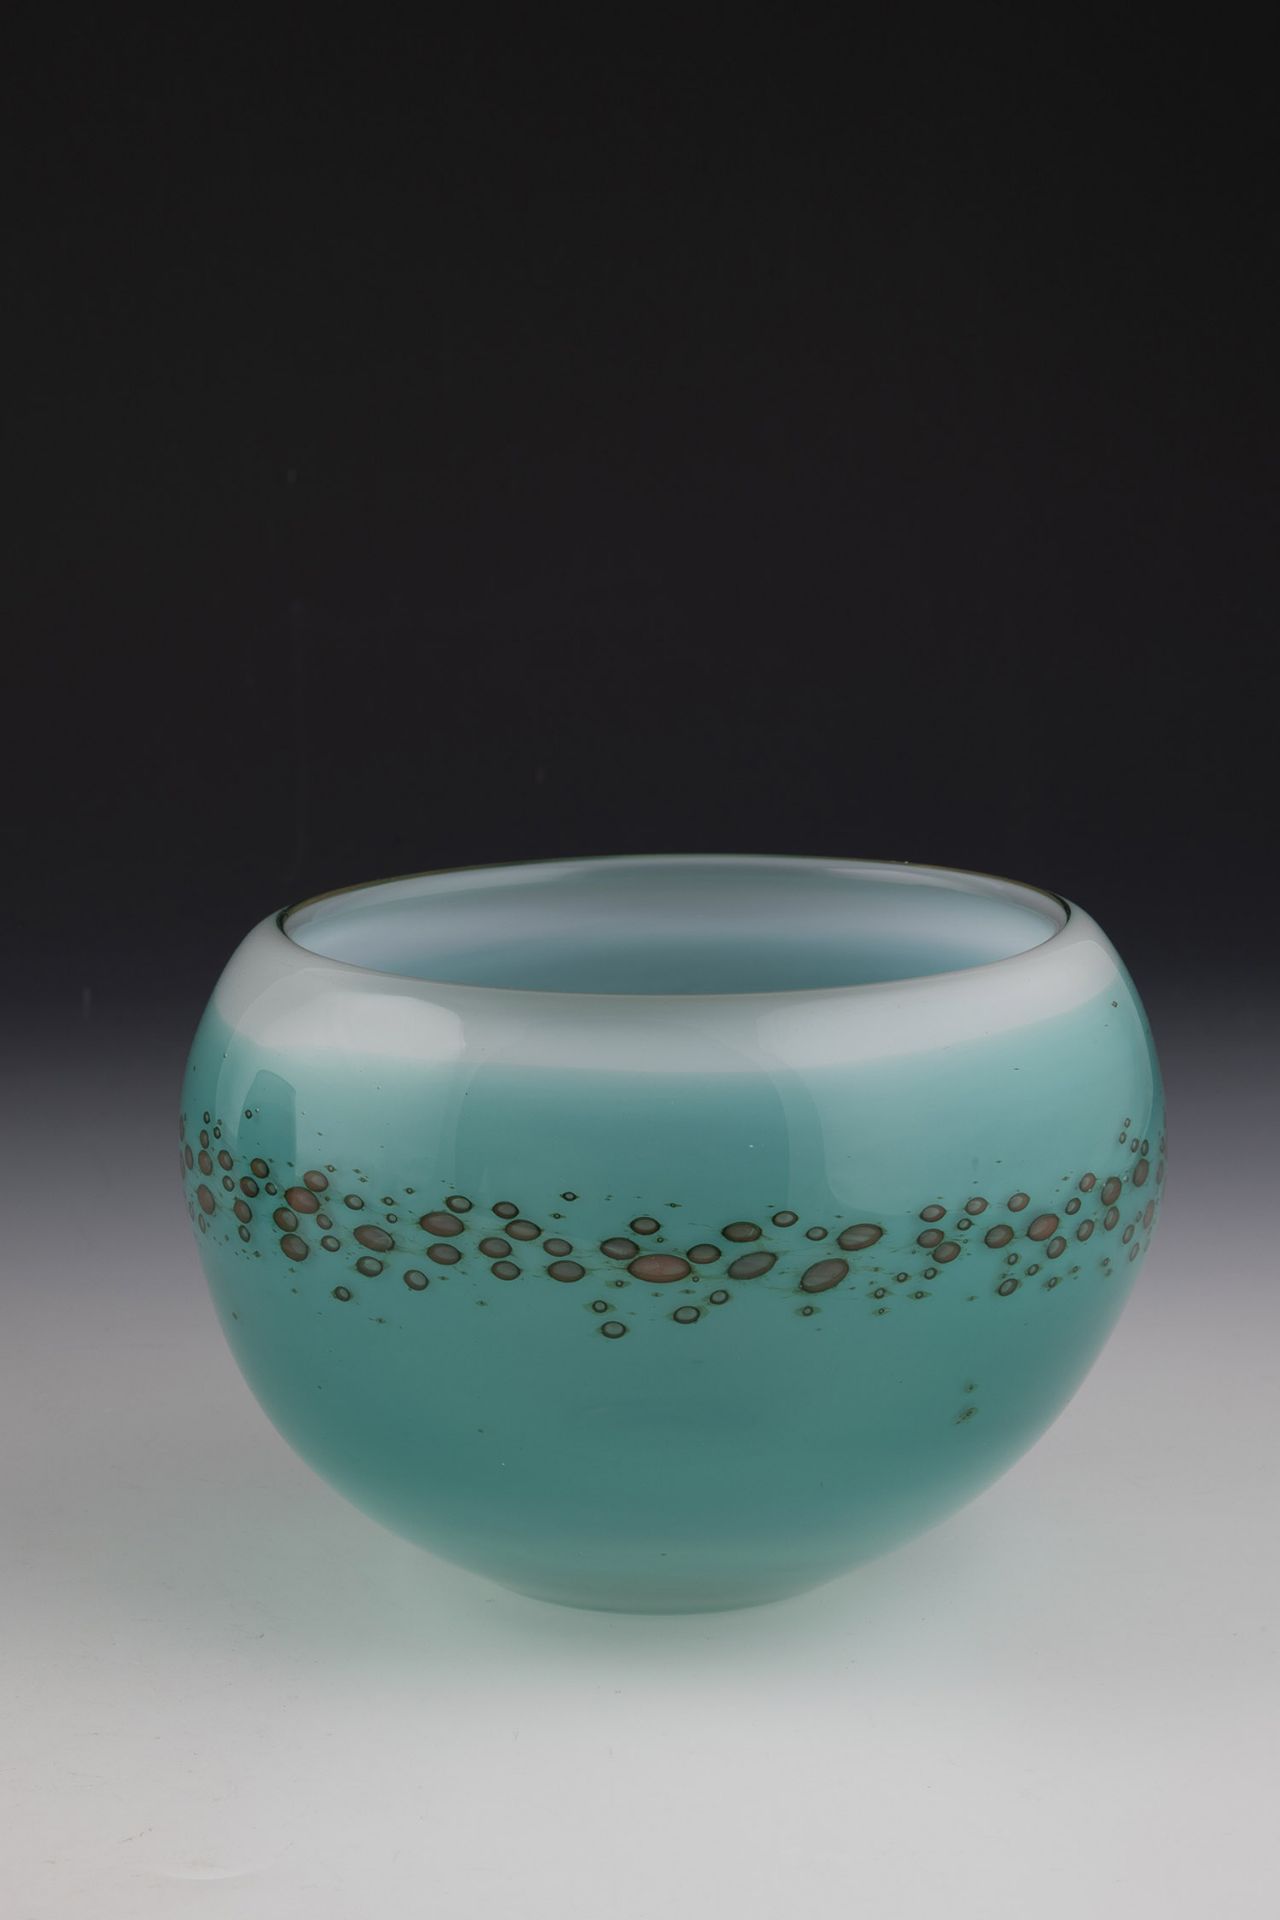 Vase Hartmut Bechmann, 1997 Colourless glass, with partial underpinnings in turquoise and white